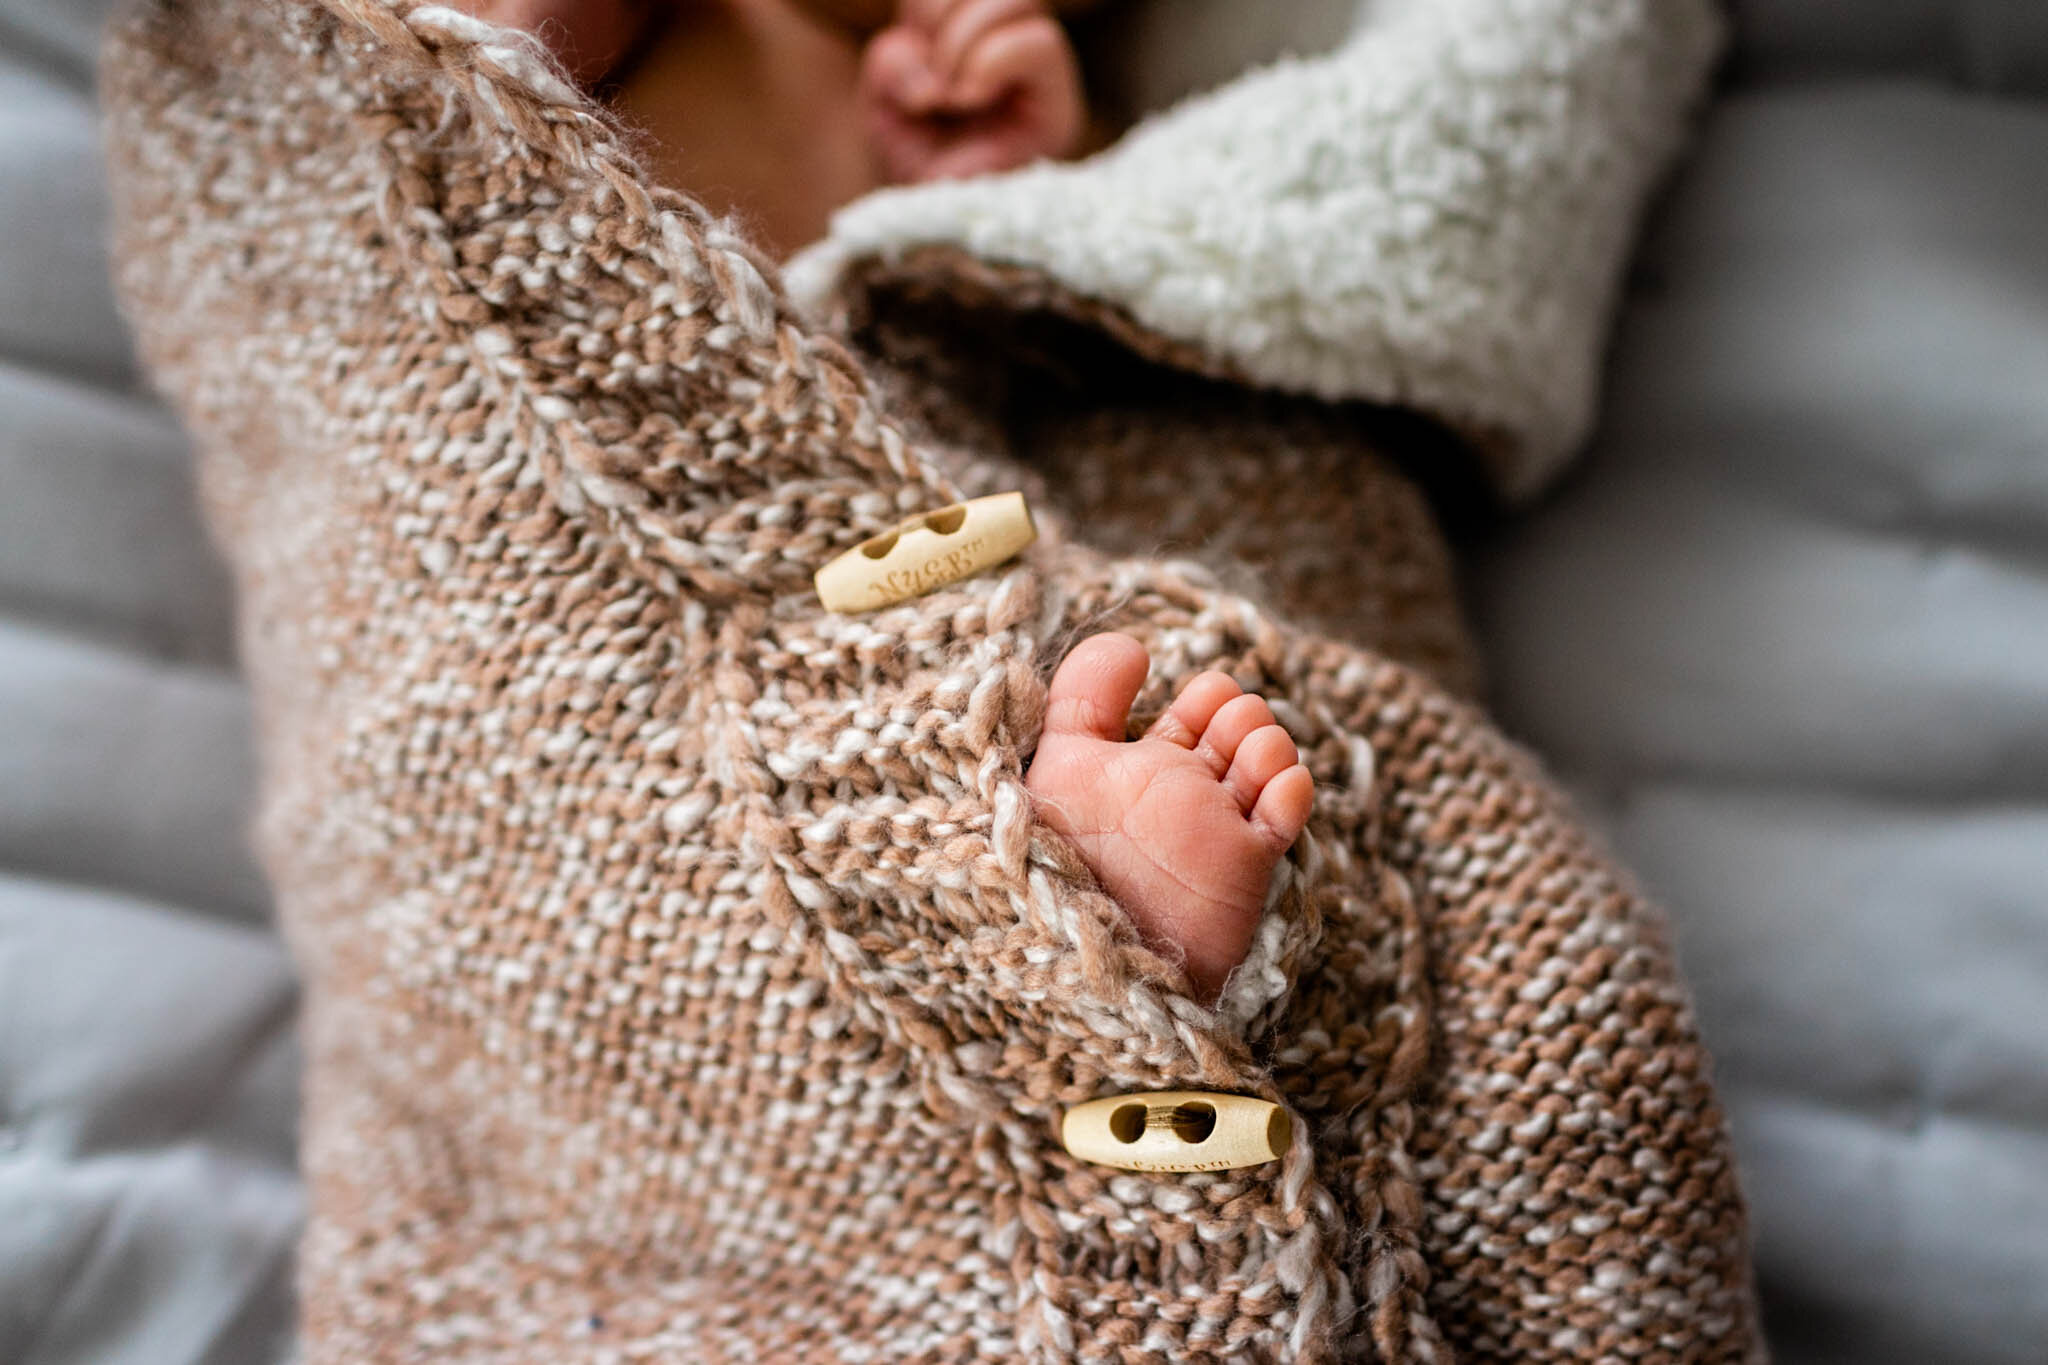 Durham Newborn Photographer | By G. Lin Photography | Baby's toes poking out of swaddle